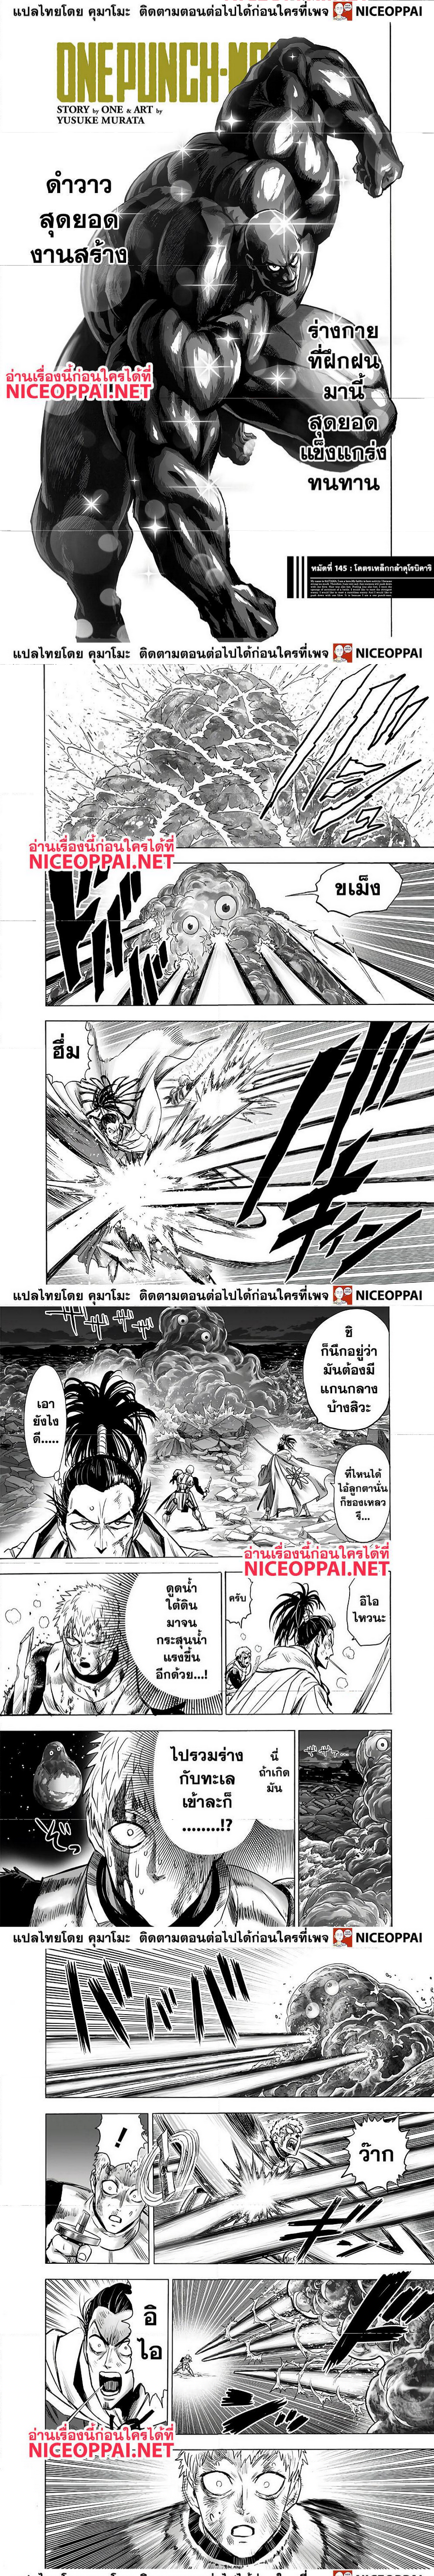 One Punch Man145 (2)